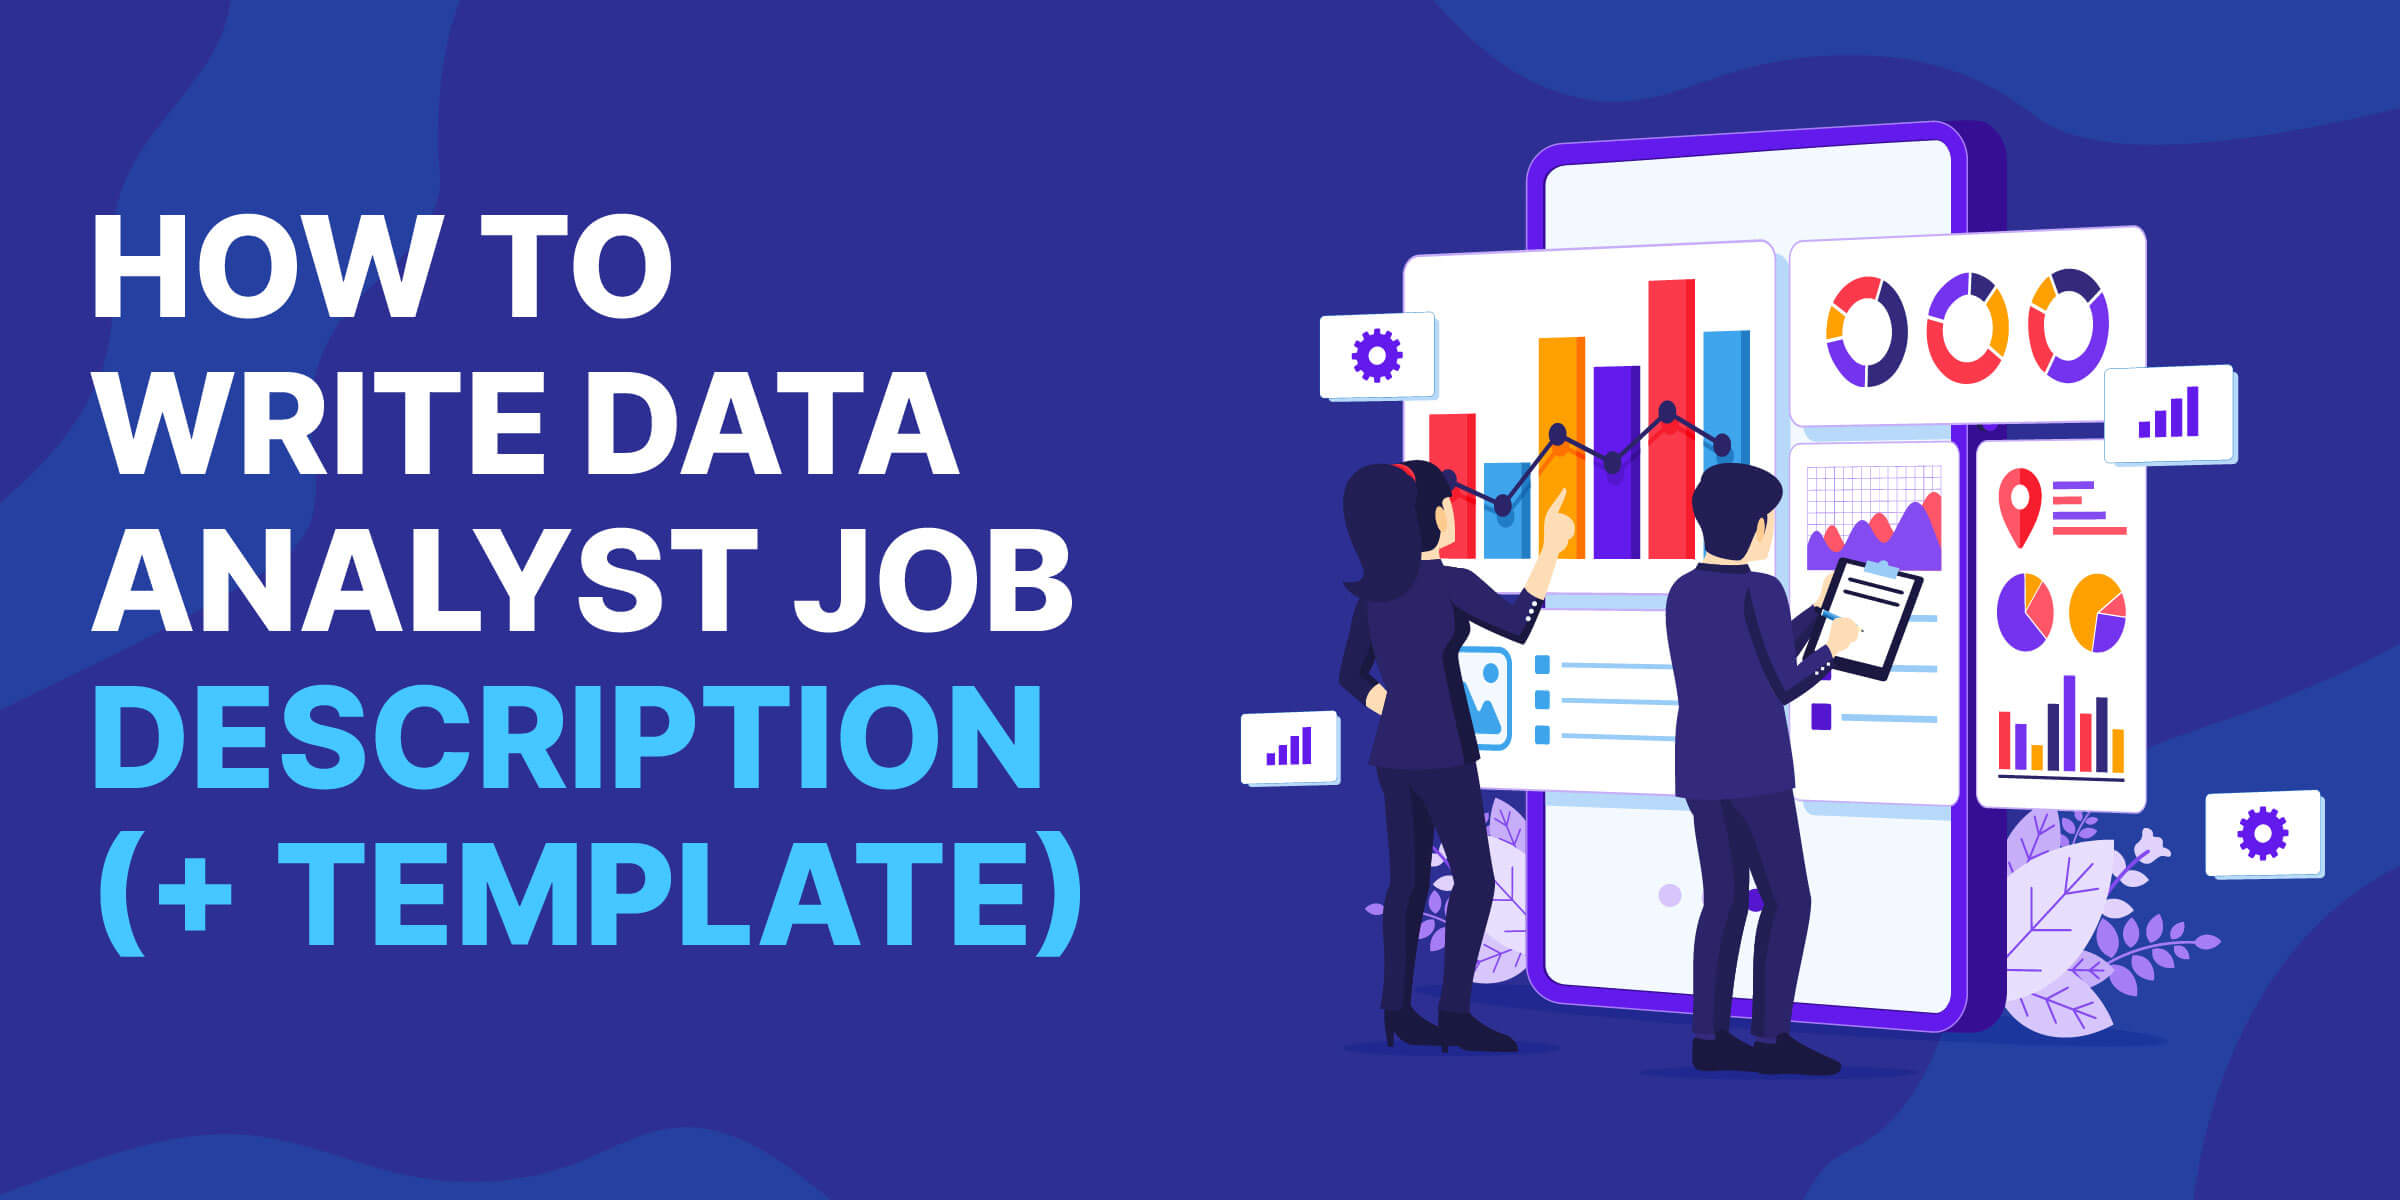 How to Write Data Analyst Job Description and Template